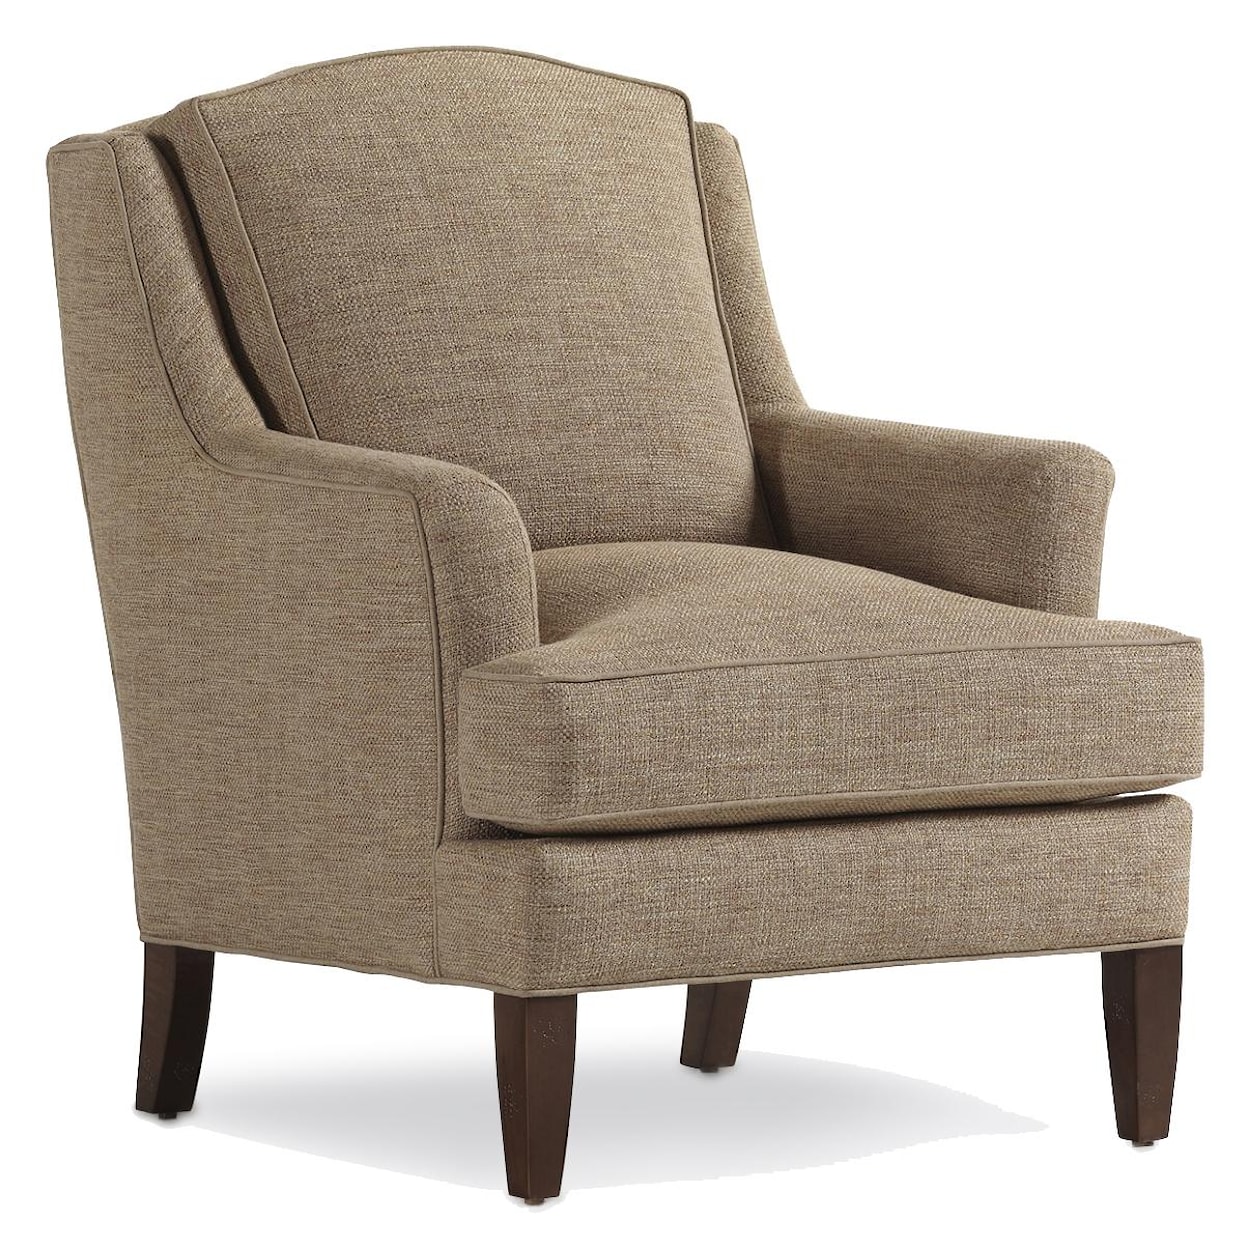 Jessica Charles Fine Upholstered Accents Landon Chair